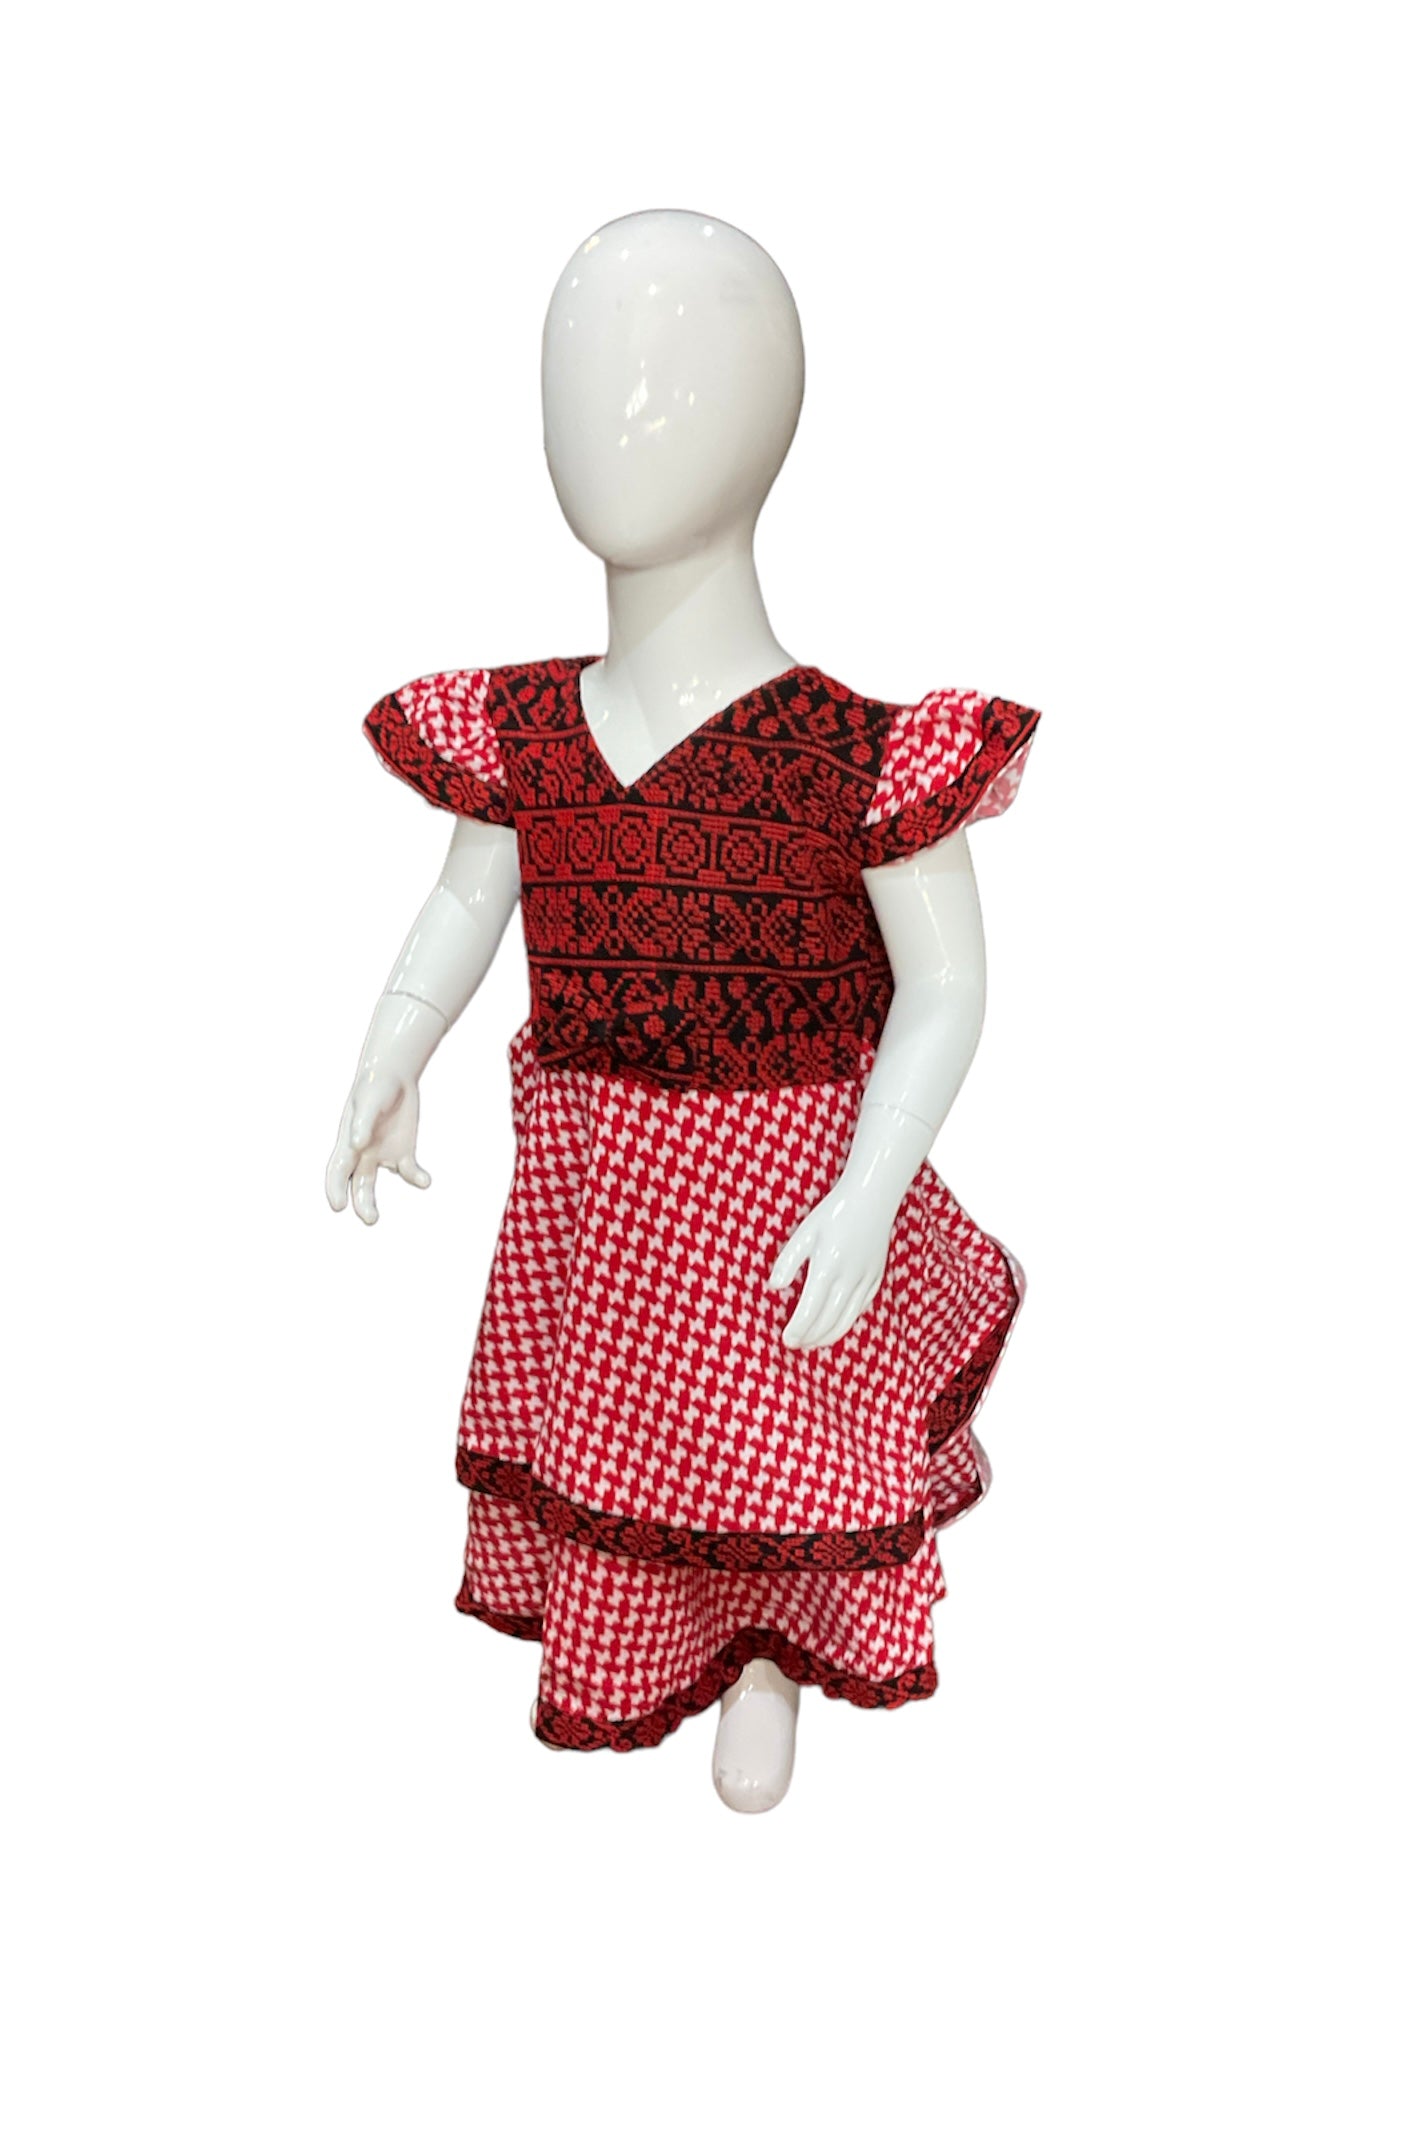 Embroidered Dress for Kids - Red, White - Shemagh Patterned.